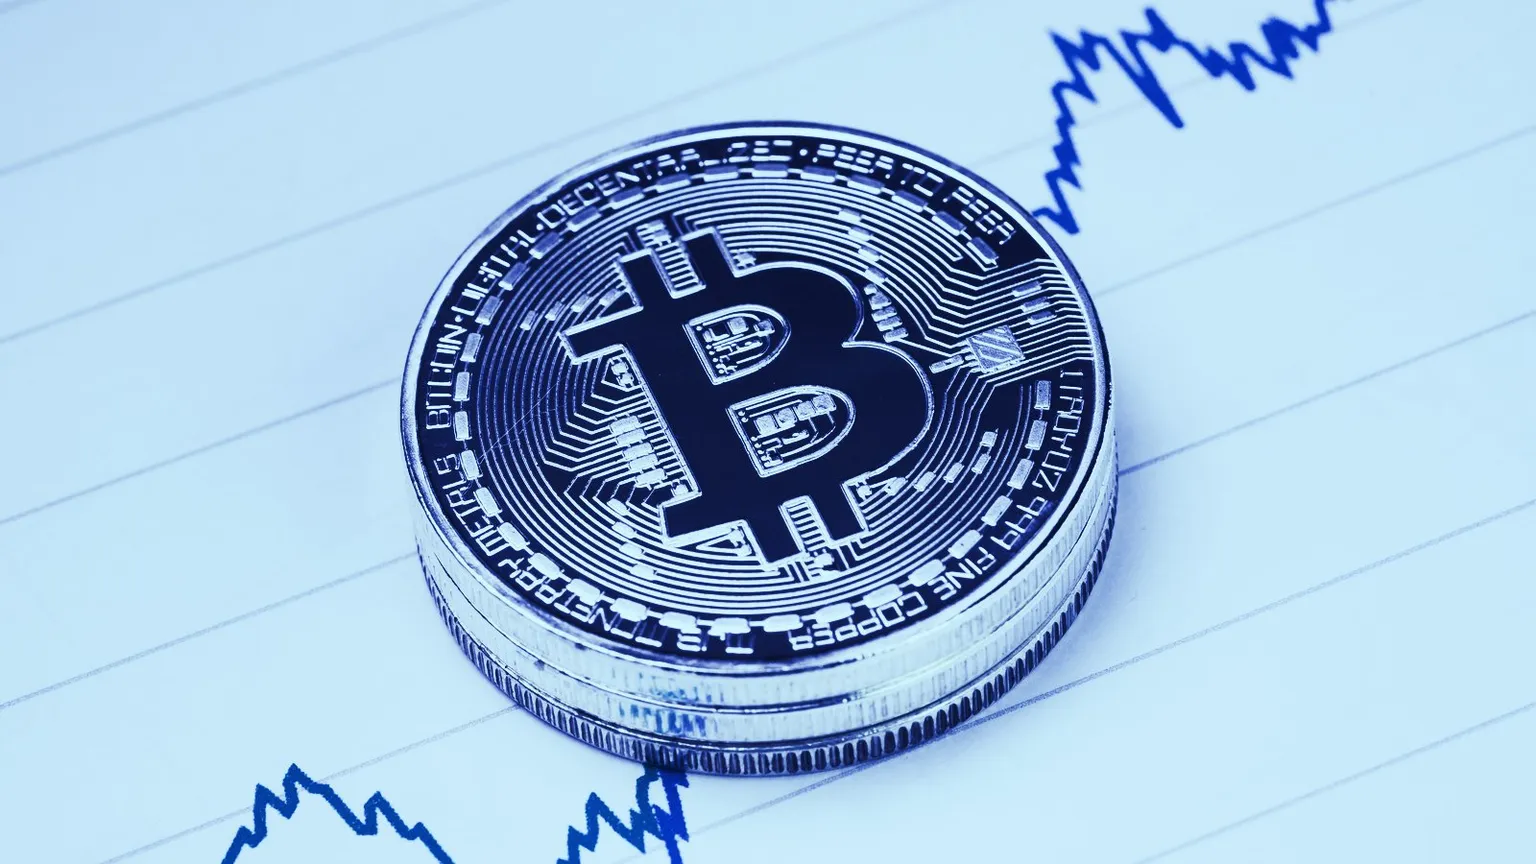 Bitcoin's price has gone up. Image: Shutterstock.